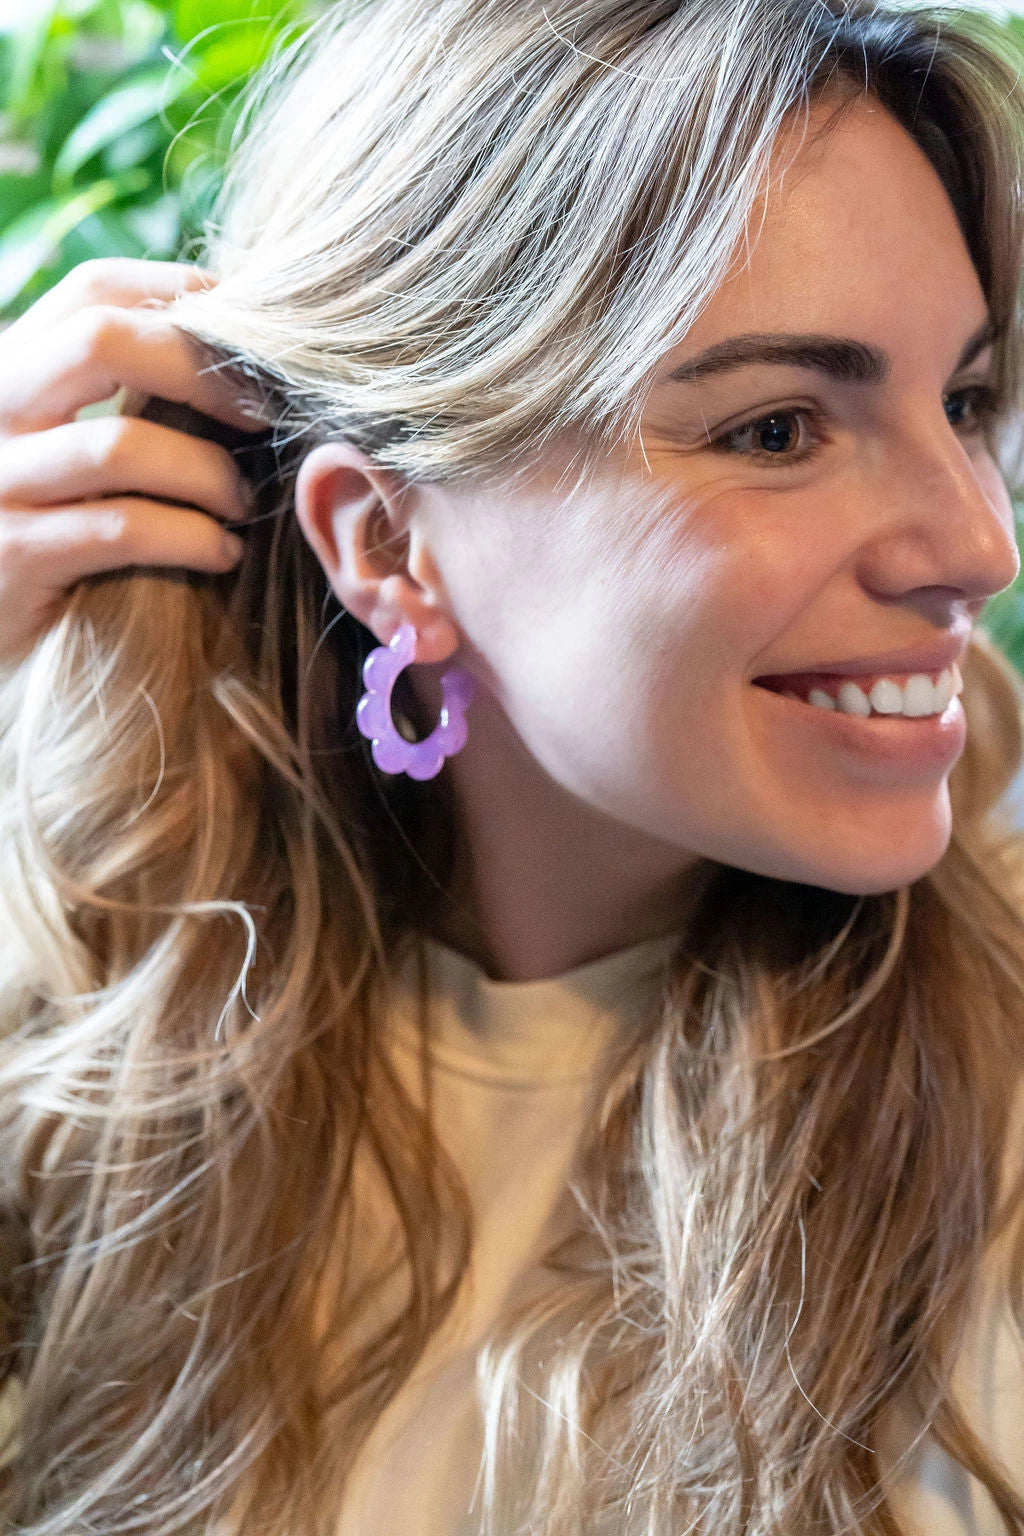 Add a retro vibe to your outfit with our Flora Hoops. The floral design gives these earrings a unique, eye-catching look that's sure to turn heads.  Their lightweight design makes them perfect for everyday wear, while the bright colors make them ideal for a fun night out.